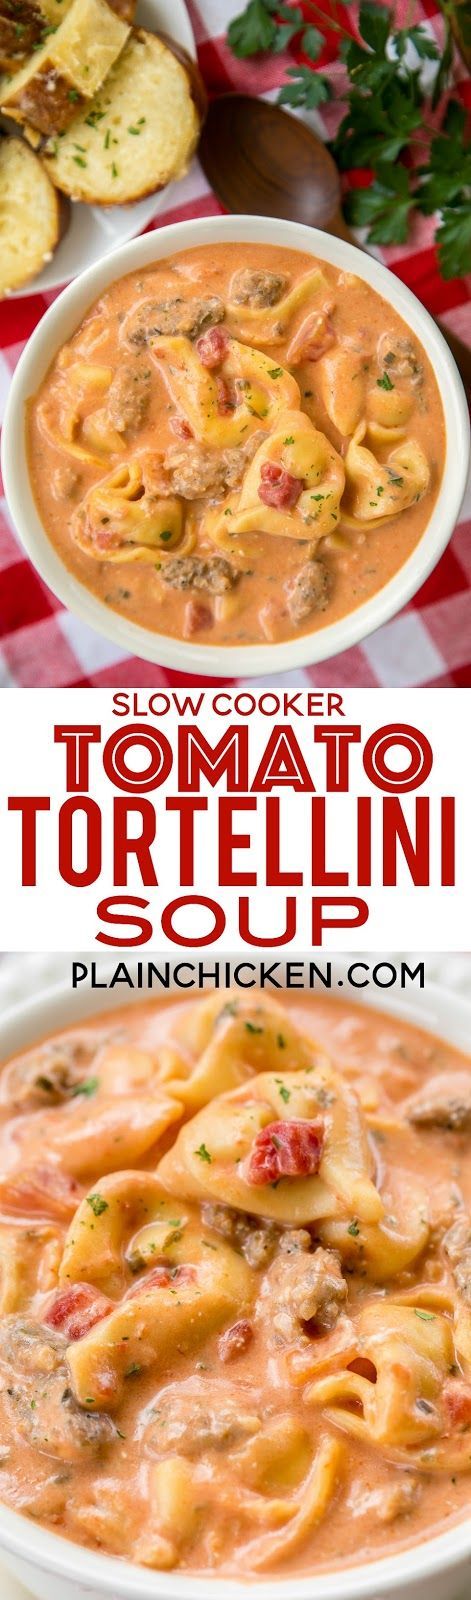 Slow Cooker Tomato Tortellini Soup – seriously delicious! Everyone LOVED this no-fuss soup recipe. Just dump everything in the